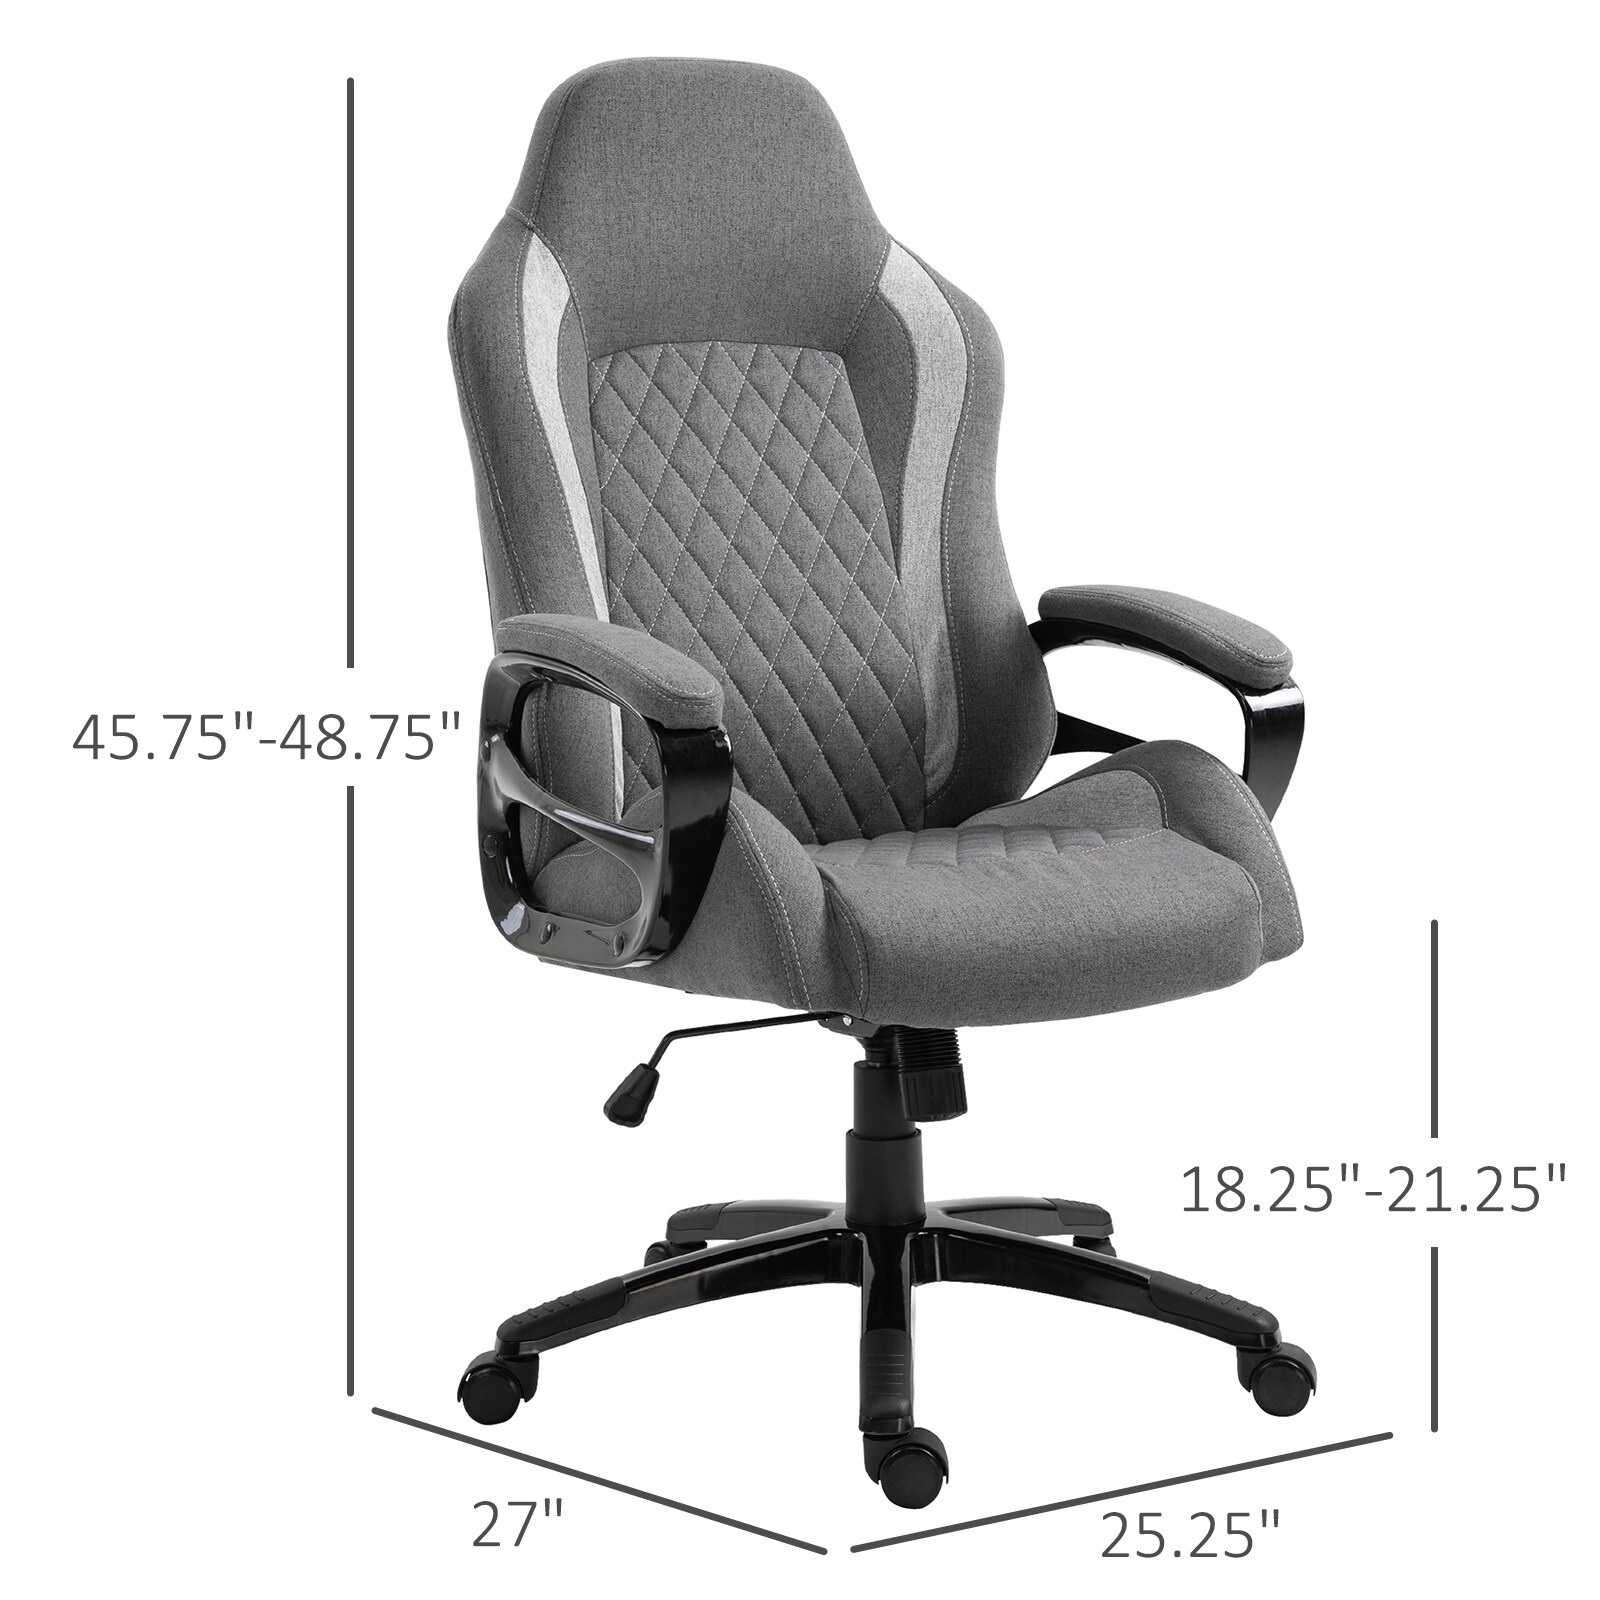 https://ak1.ostkcdn.com/images/products/is/images/direct/04917eff475196868381ed515764e7bd97847c20/Vinsetto-Ergonomic-Office-Chair-Adjustable-Height-Fabric-Rocker-360%C2%B0-Swivel-Home-Desk-Chair%2C-Grey.jpg